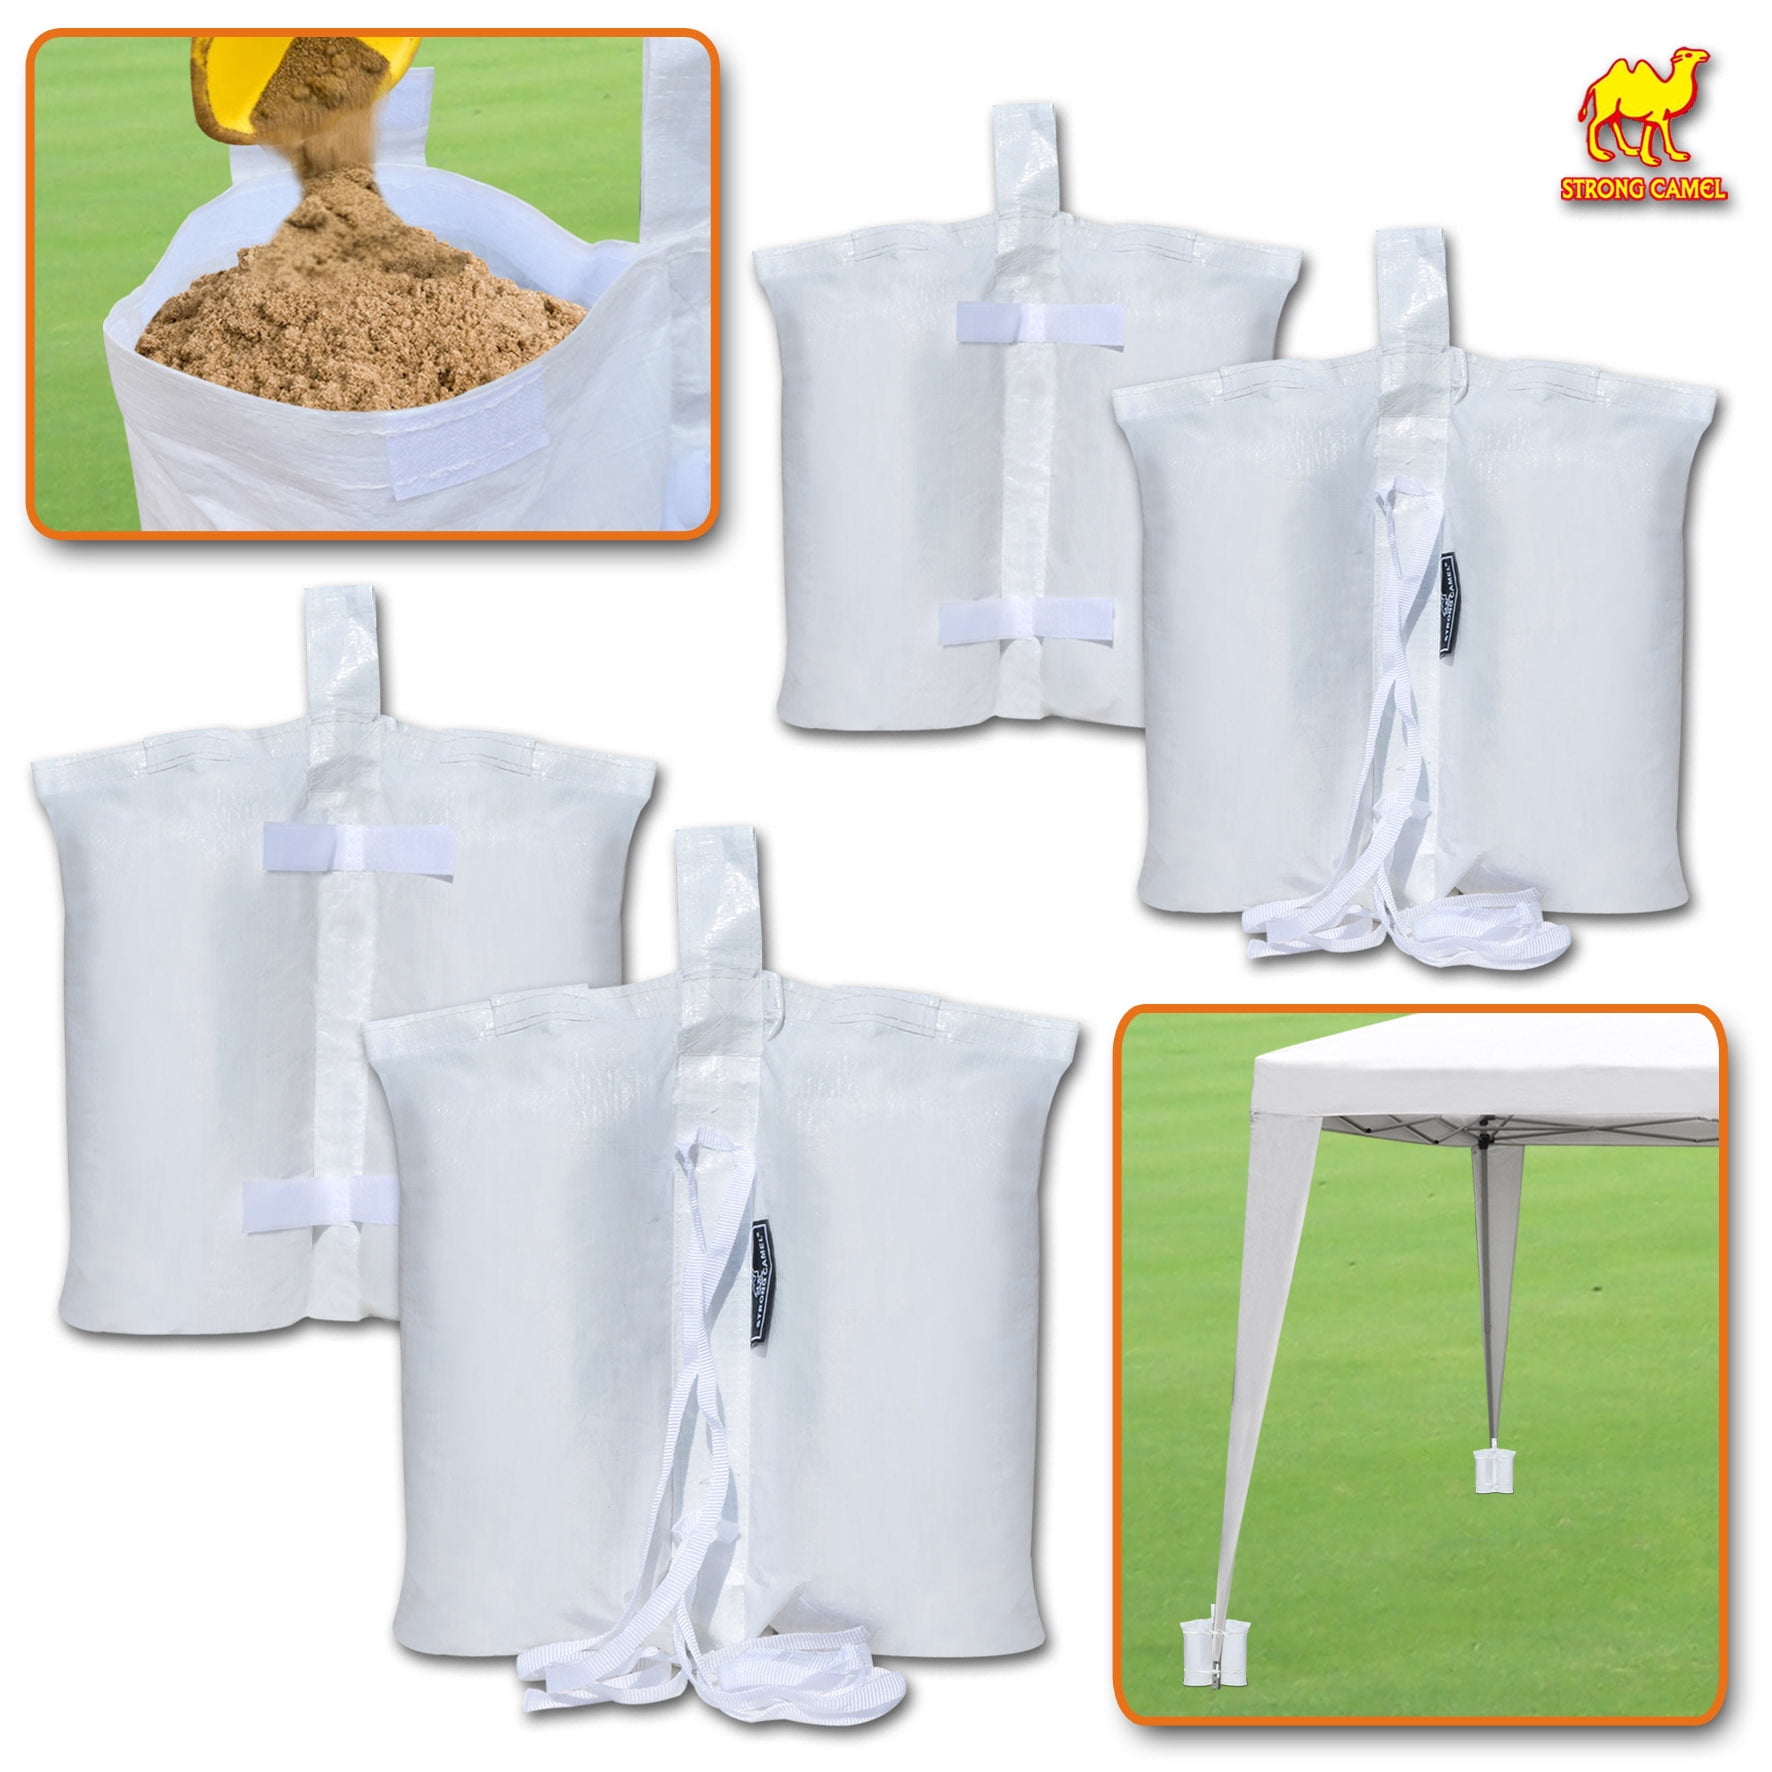 Bags Only, Sand Excluded TESSLOVE Industrial Grade Weight Bags Patio Umbrella Outdoor Furniture Sand Bags Leg Weights for Pop up Canopy Tent